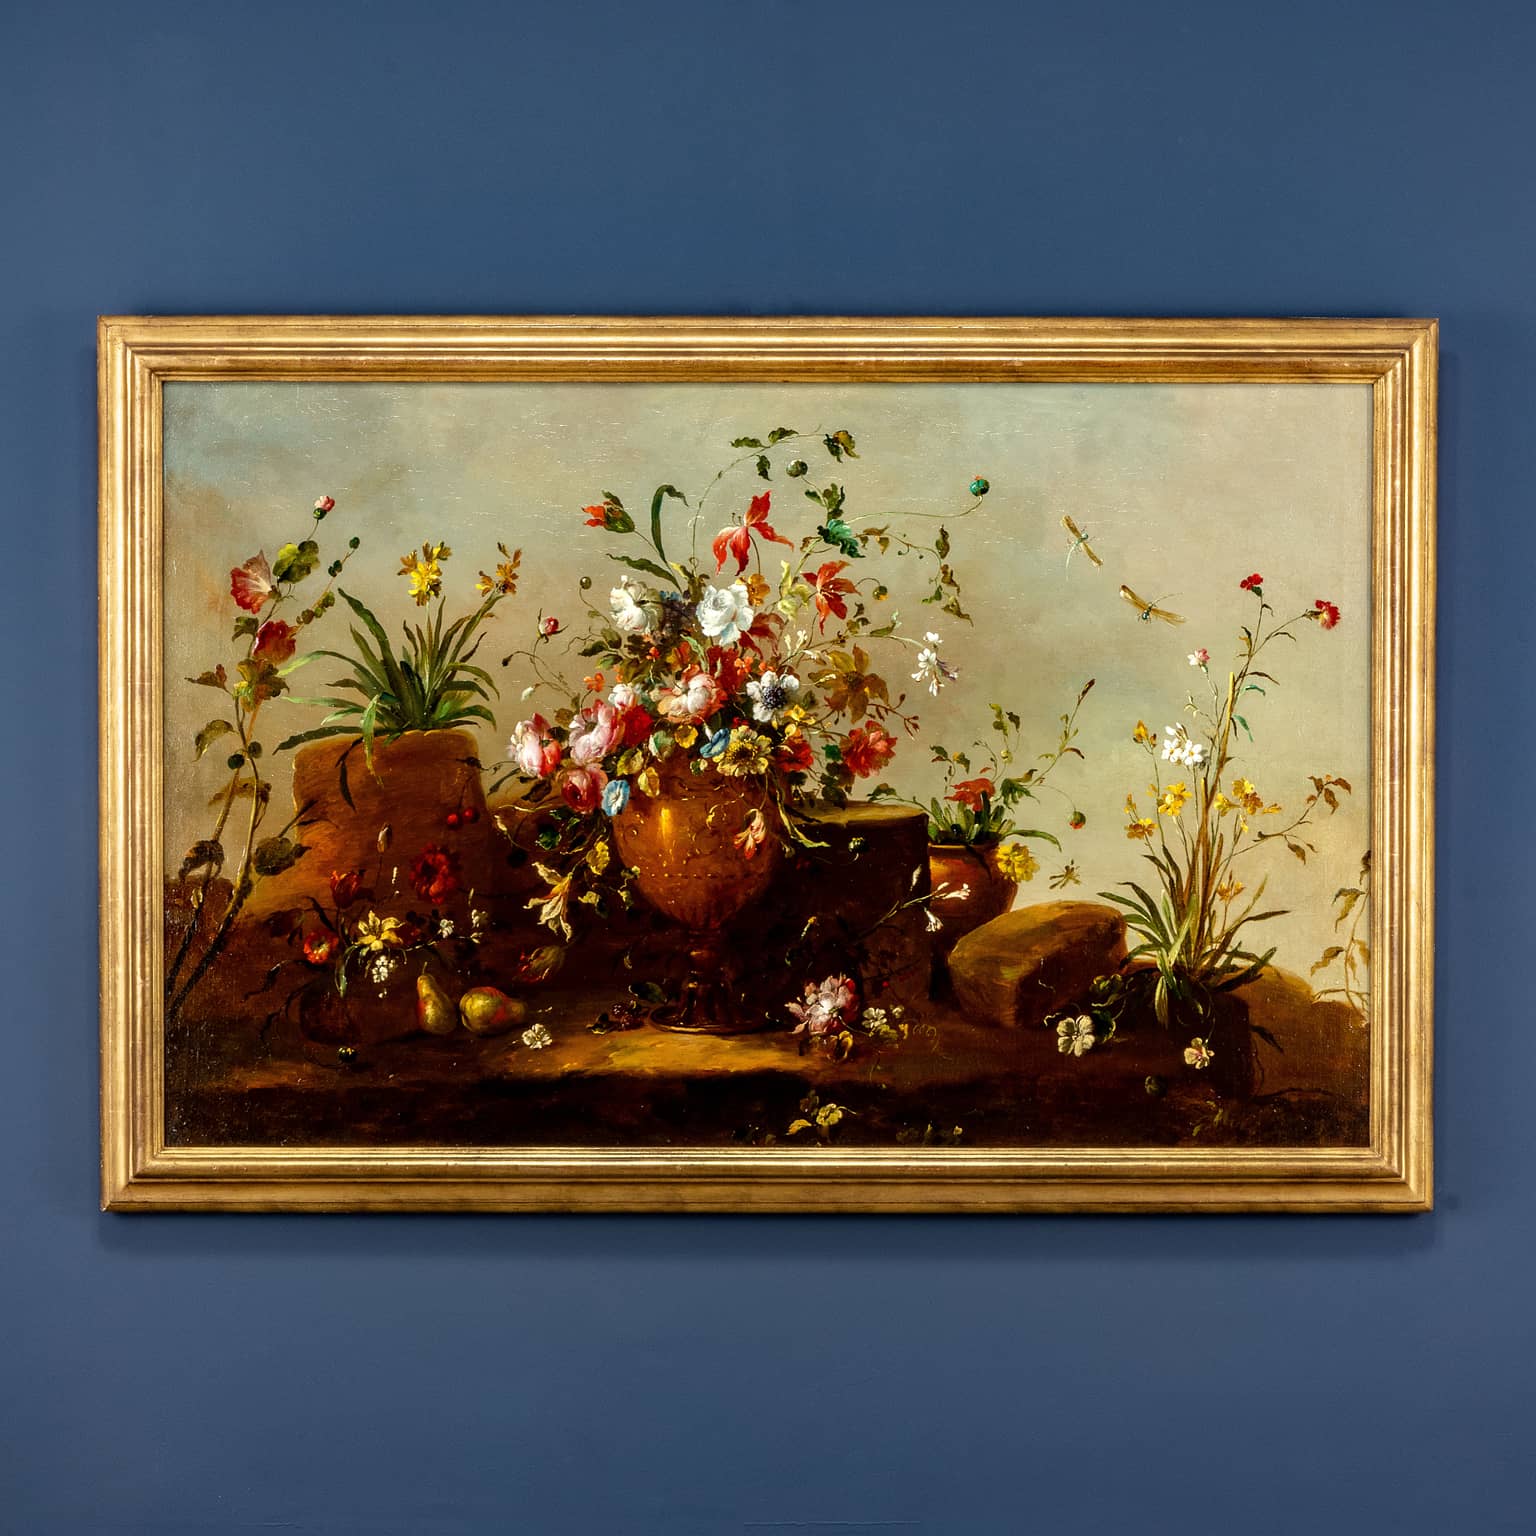 Still life with flowers and fruits outdoors – Francesco Duramano